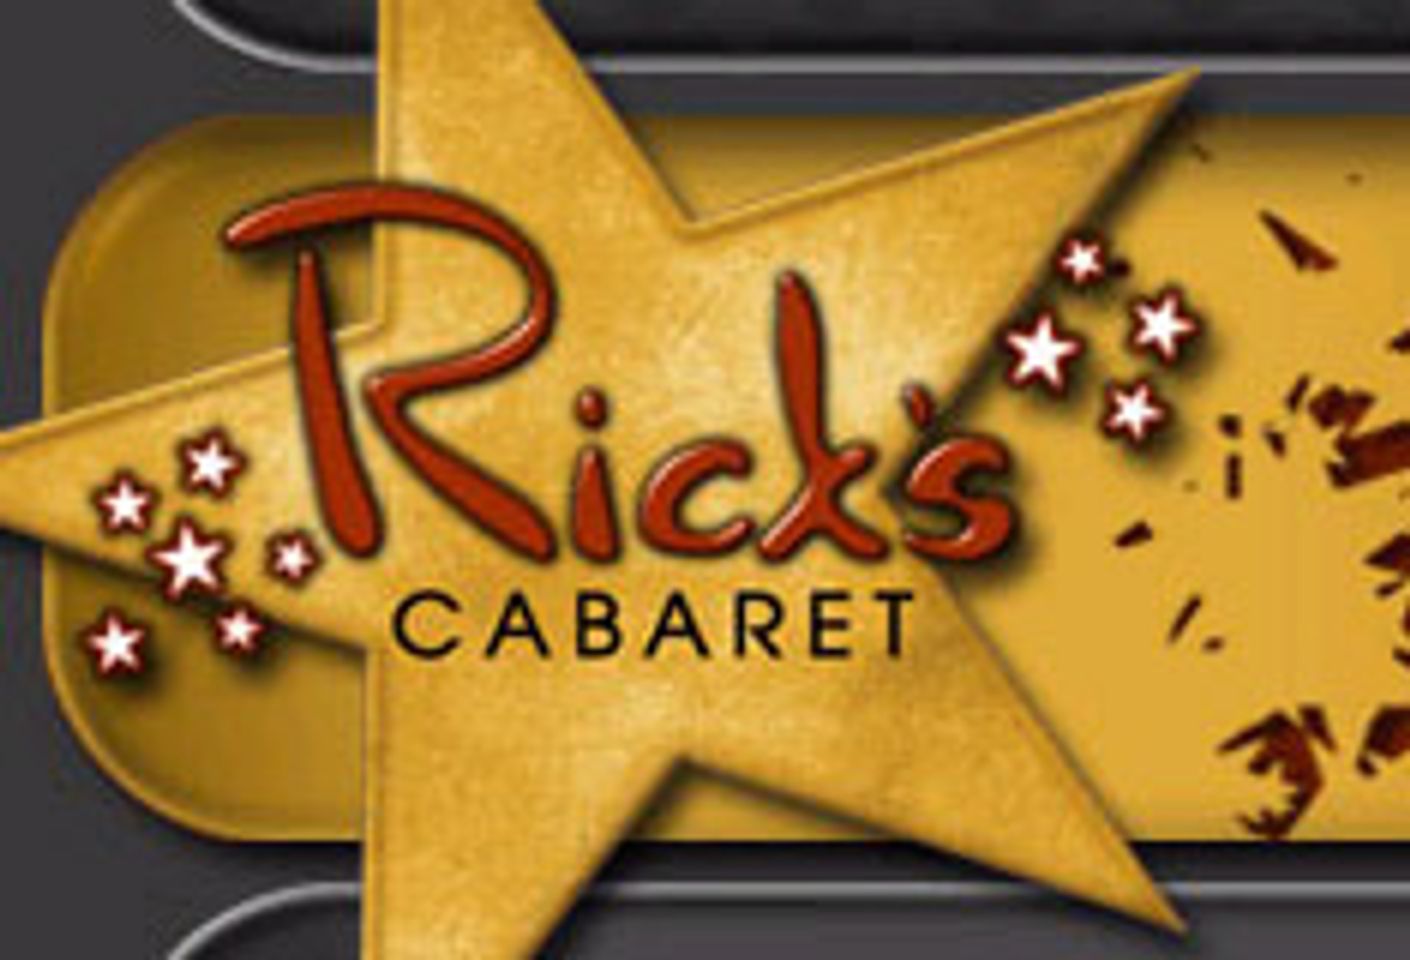 Rick&#8217;s Cabaret to Acquire Centerfolds Club